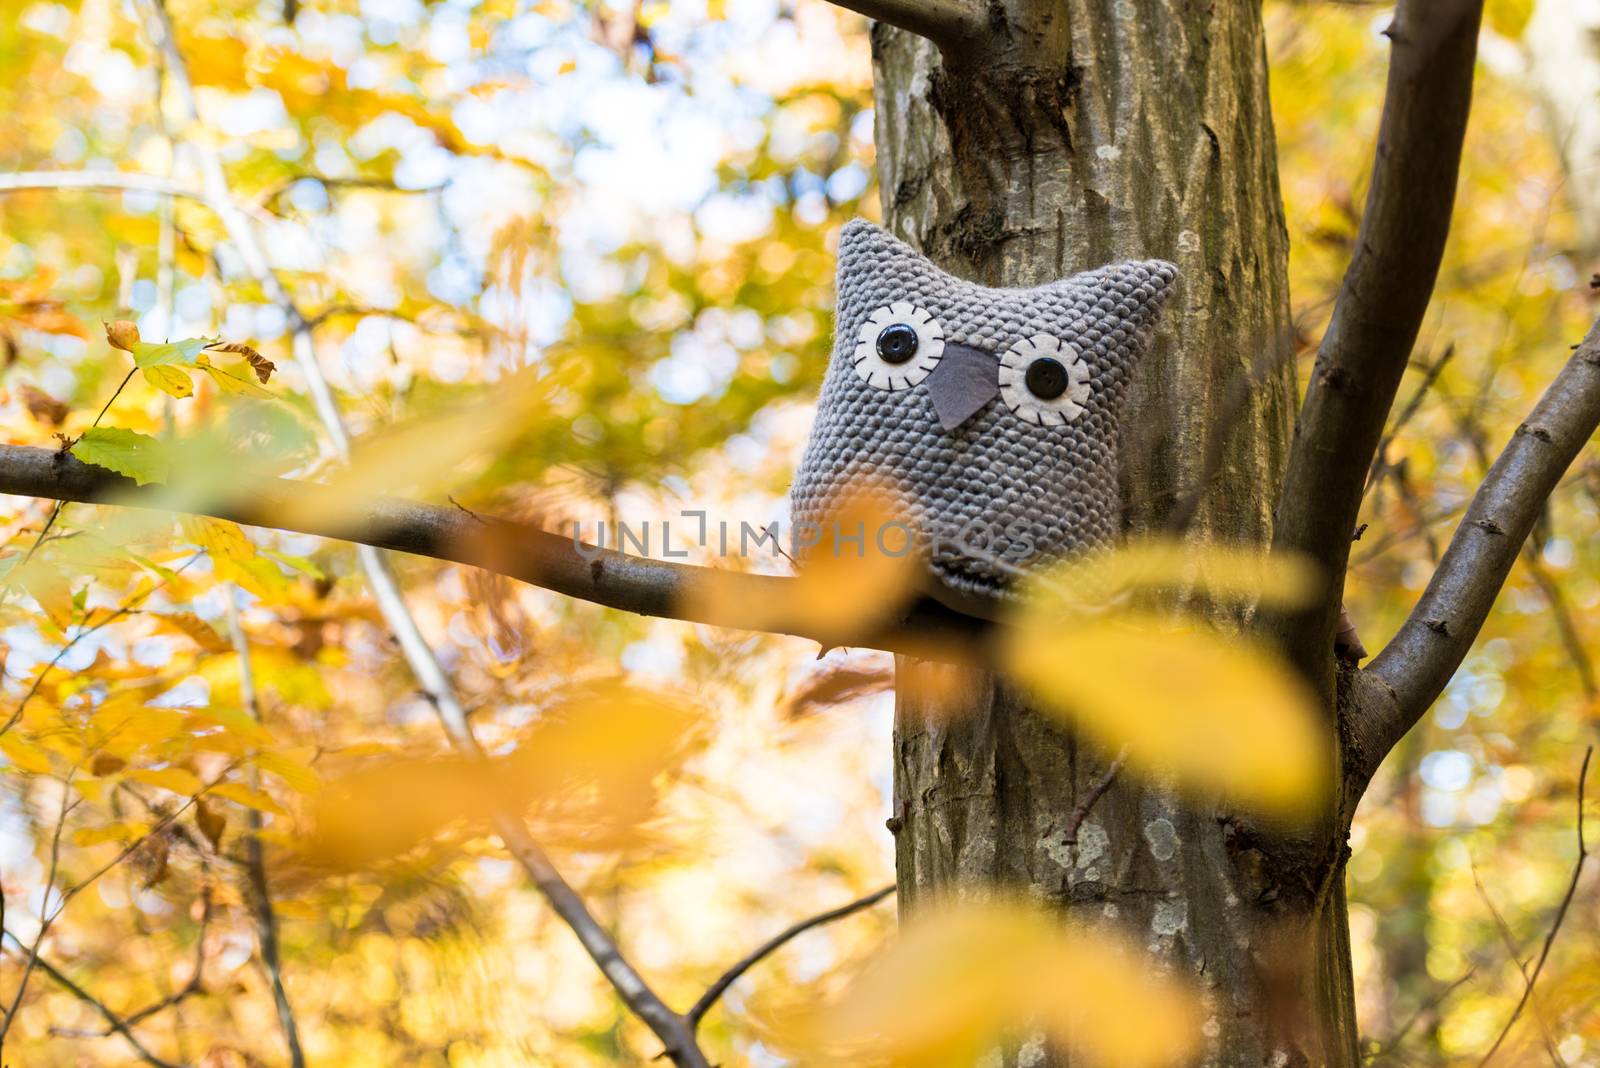 A handmade soft toy owl is placed on a tree in an autumn forest